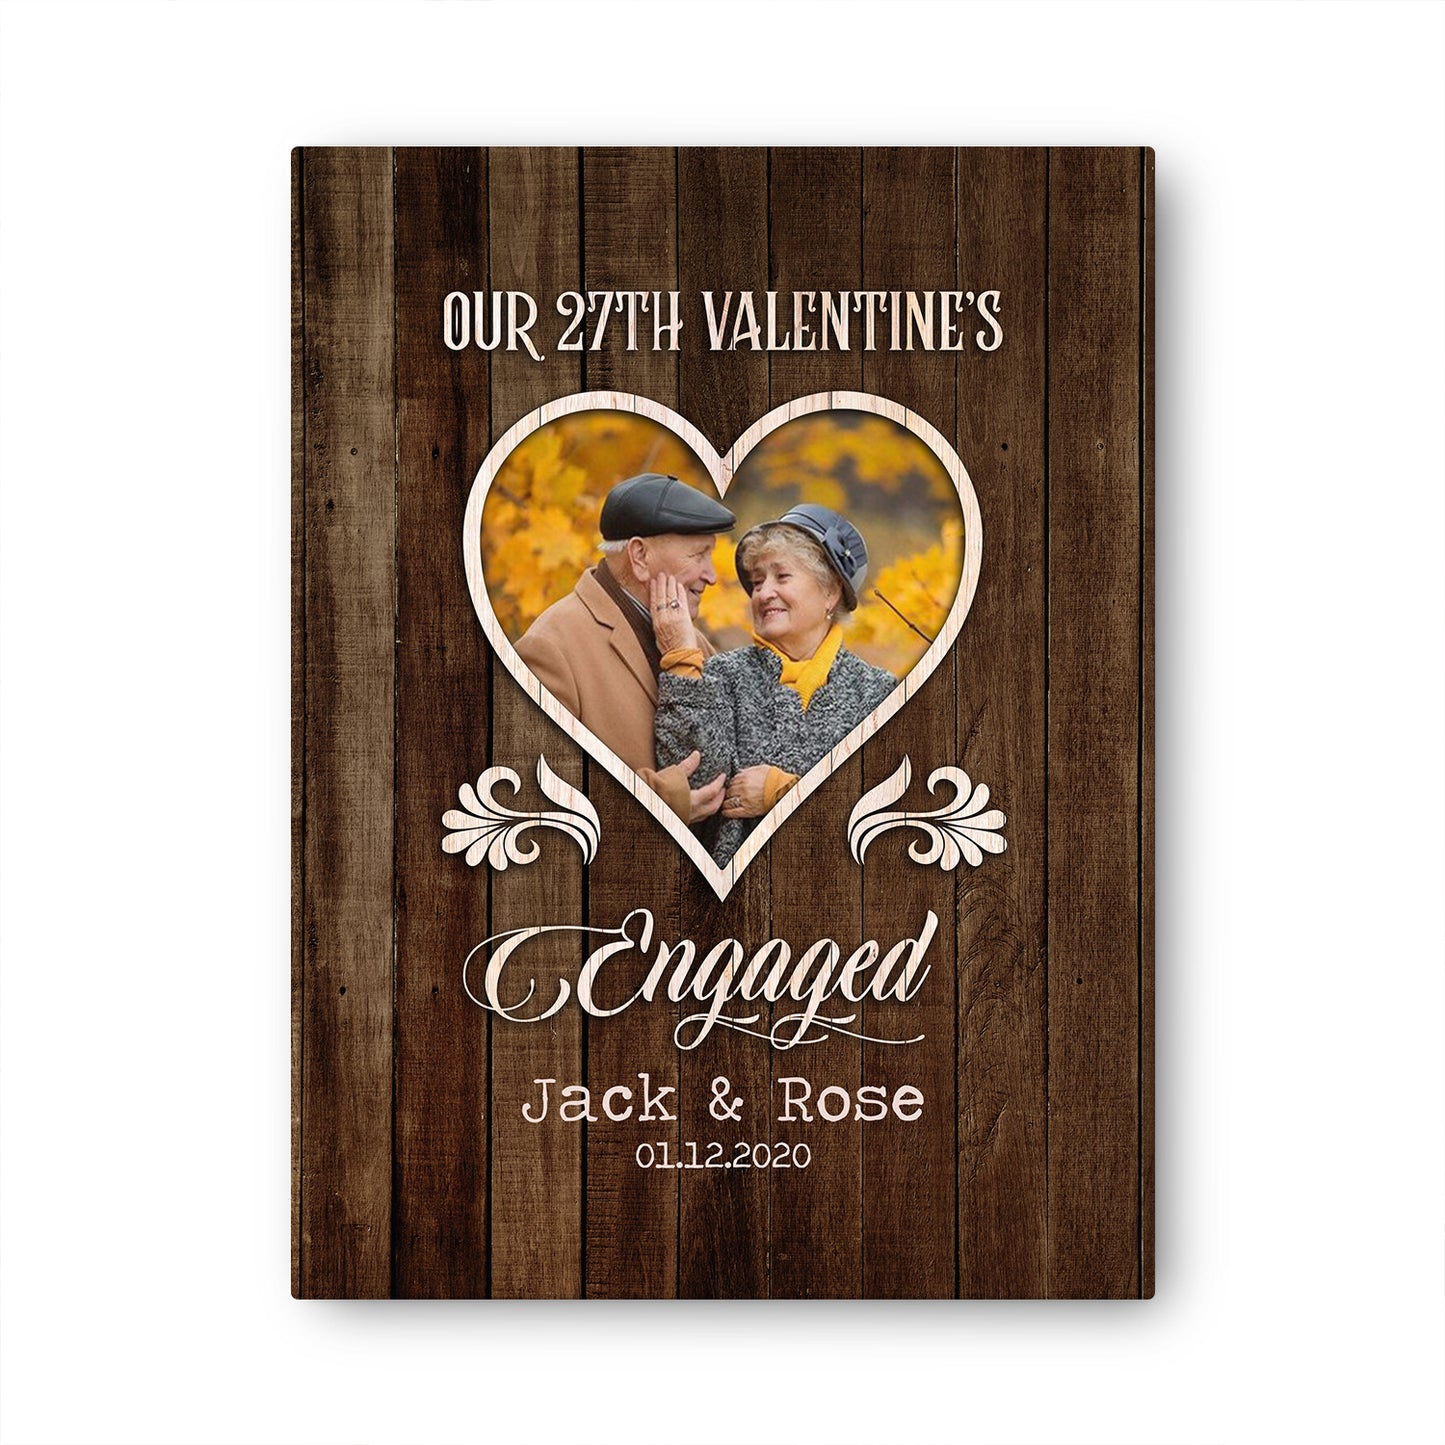 Our 27th Valentine’s Day Engaged Custom Image Anniversary Canvas